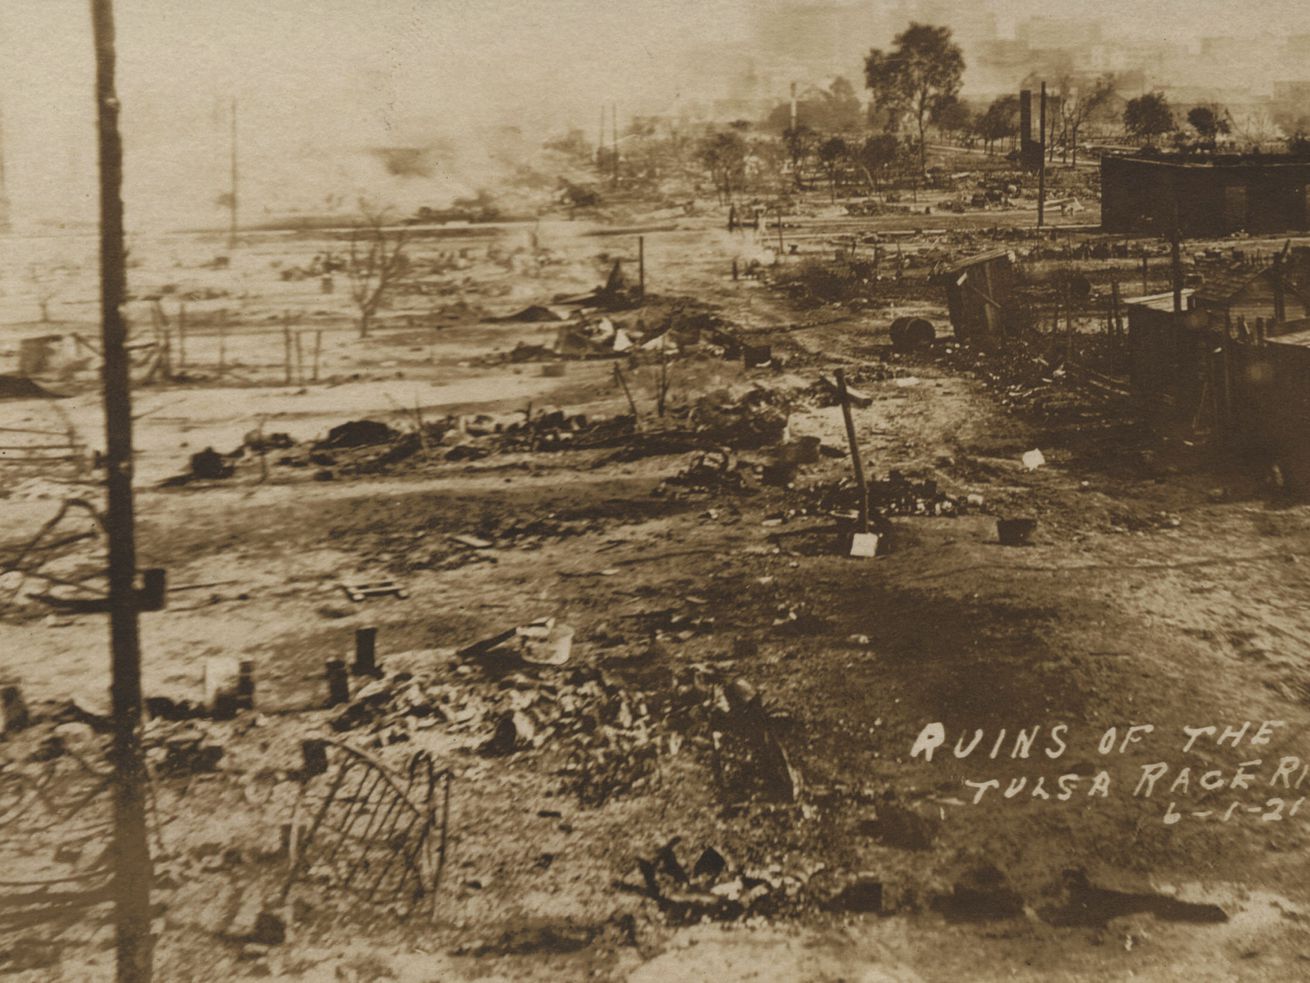 This photo provided by the Department of Special Collections, McFarlin Library, The University of Tulsa shows the ruins of Dunbar Elementary School and the Masonic Hall in the aftermath of the June 1, 1921, Tulsa Race Massacre in Tulsa, Okla. 